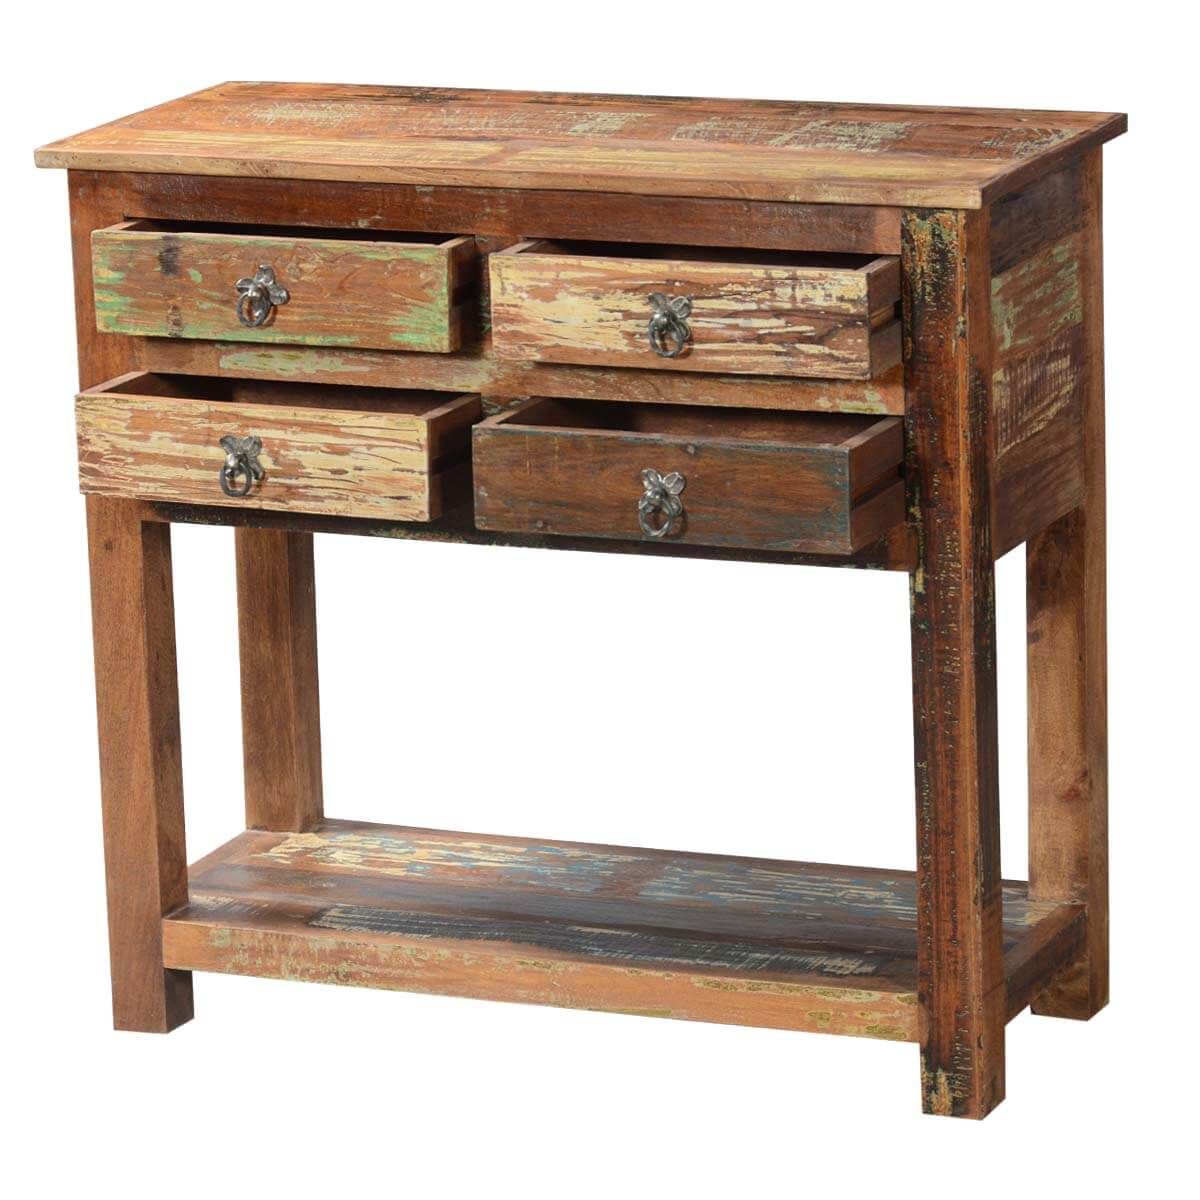 Ashland Rustic Reclaimed Wood 4 Drawer Hallway Console Table With Rustic Walnut Wood Console Tables (View 19 of 20)